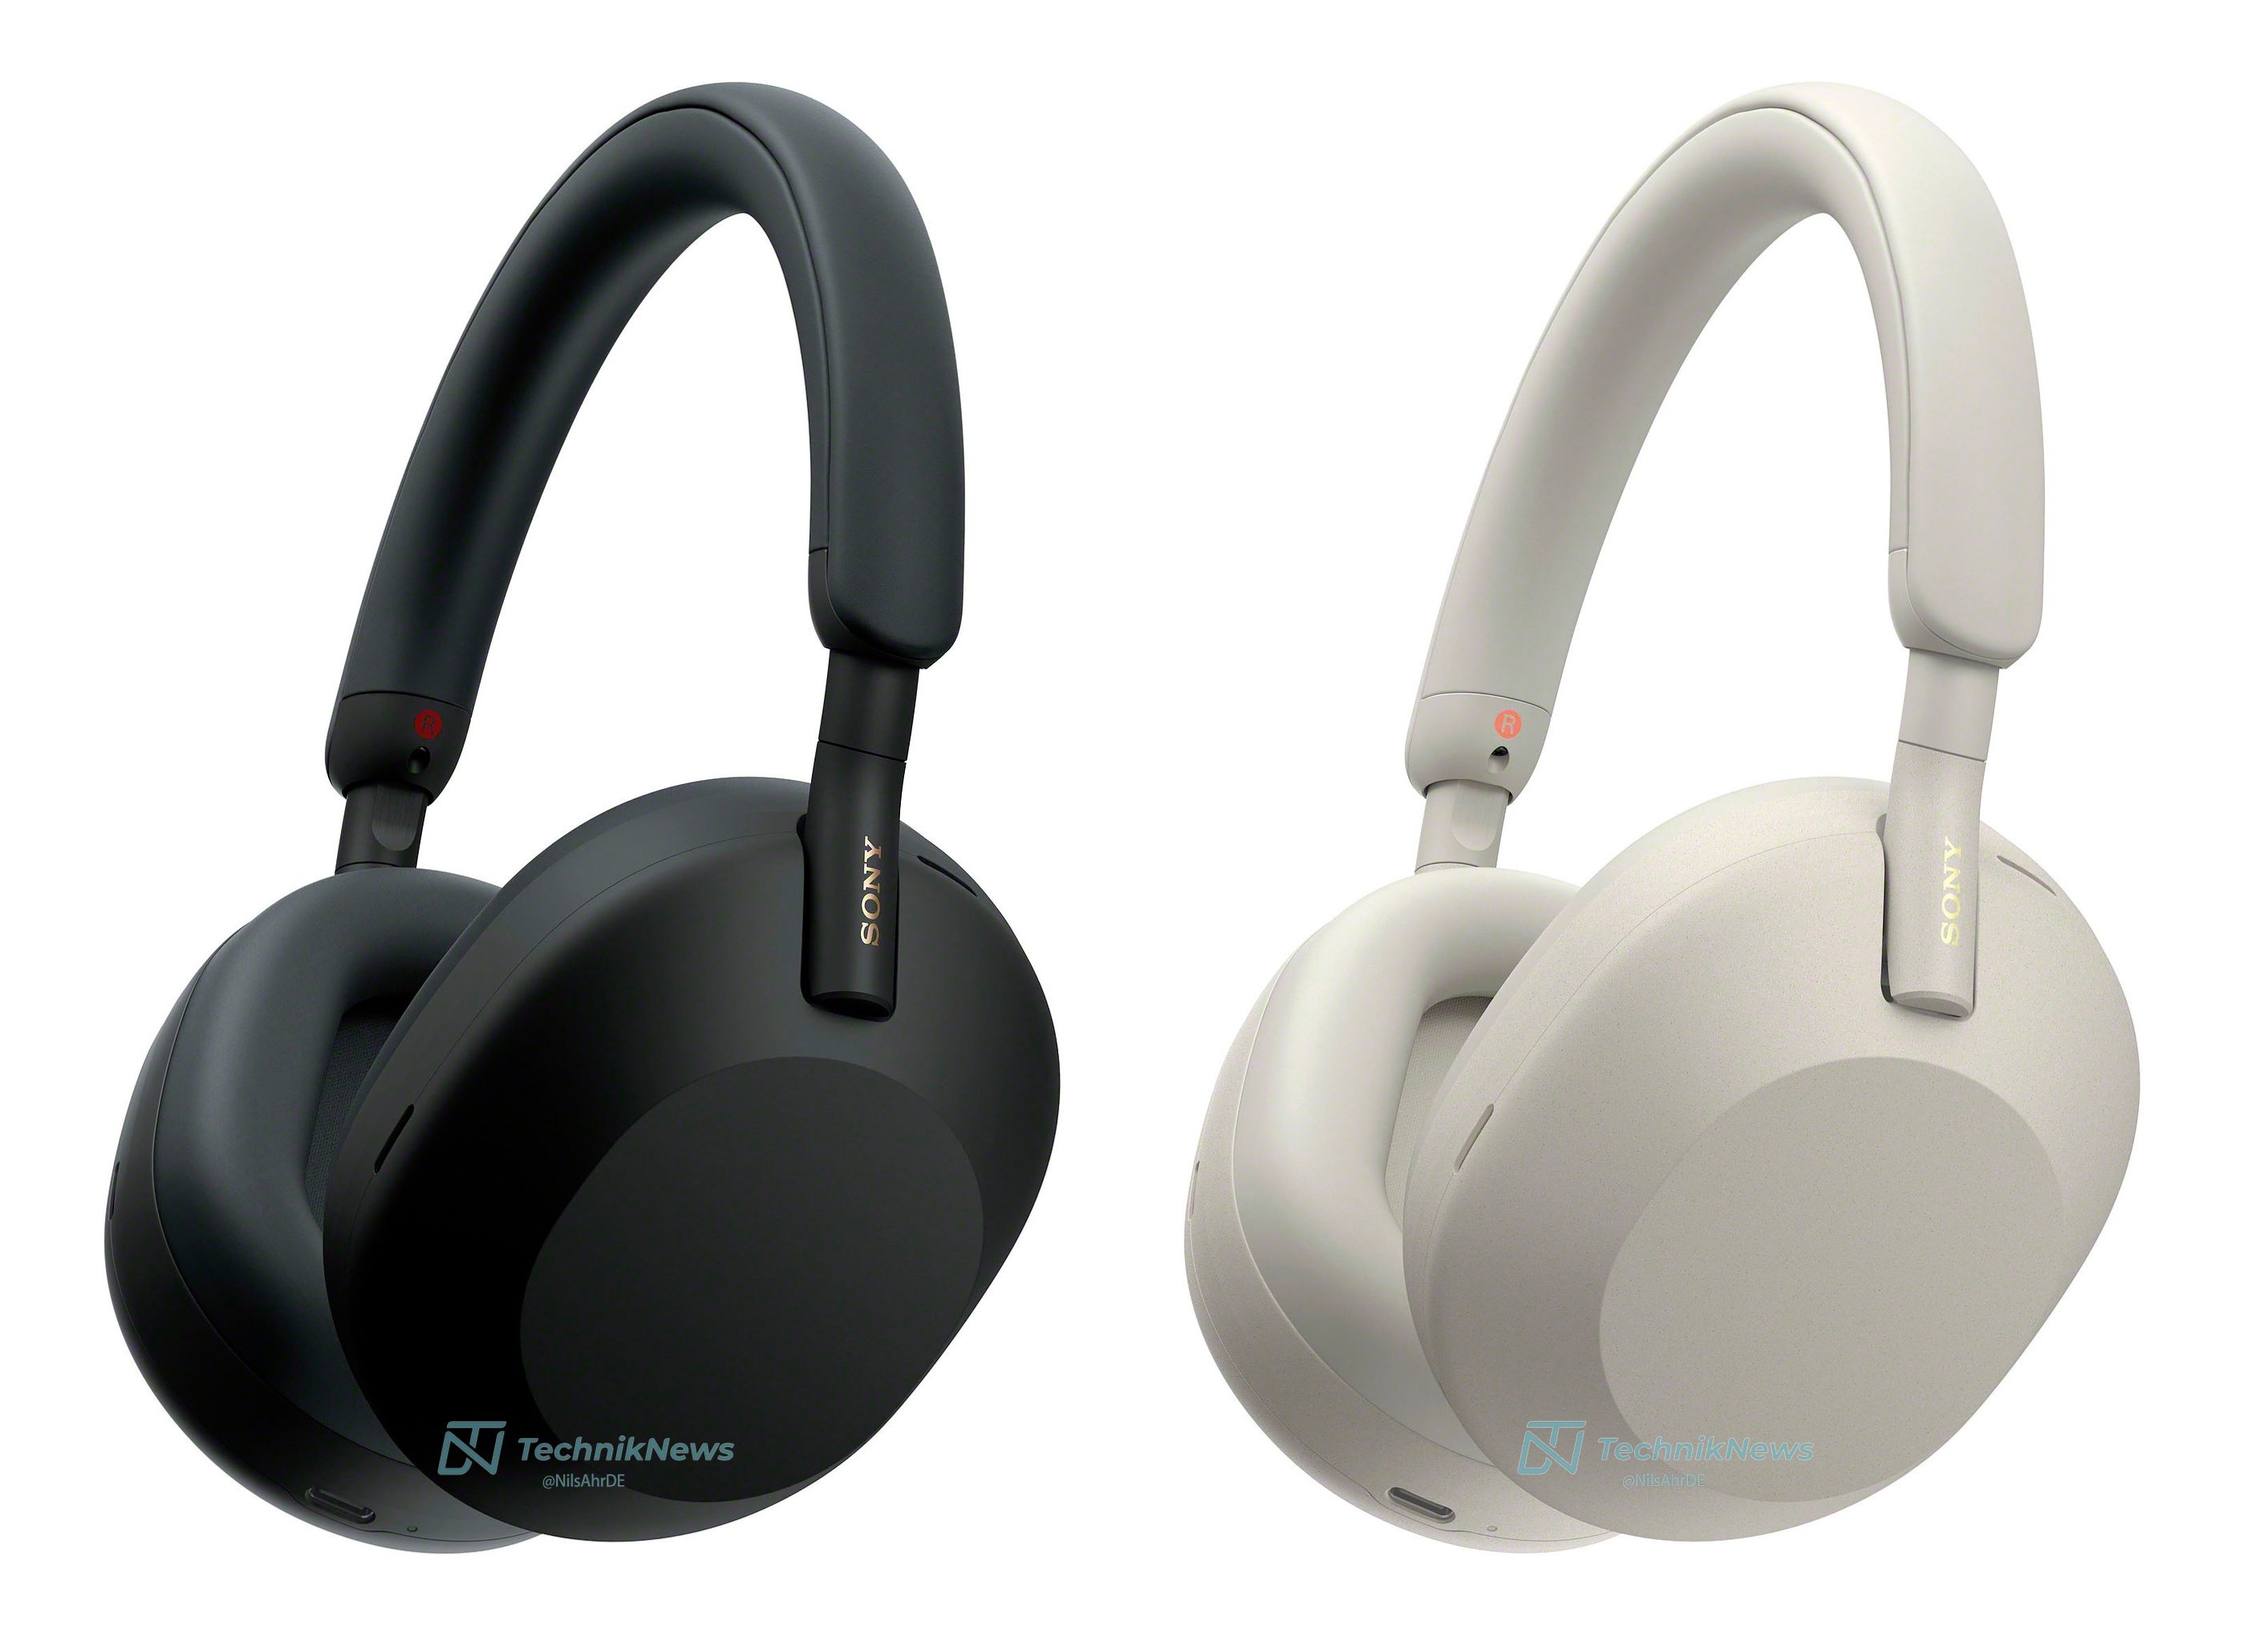 New design and autonomy up to 40 hours with ANC: renders and specifications of Sony WH-1000XM5 headphones appeared on the network